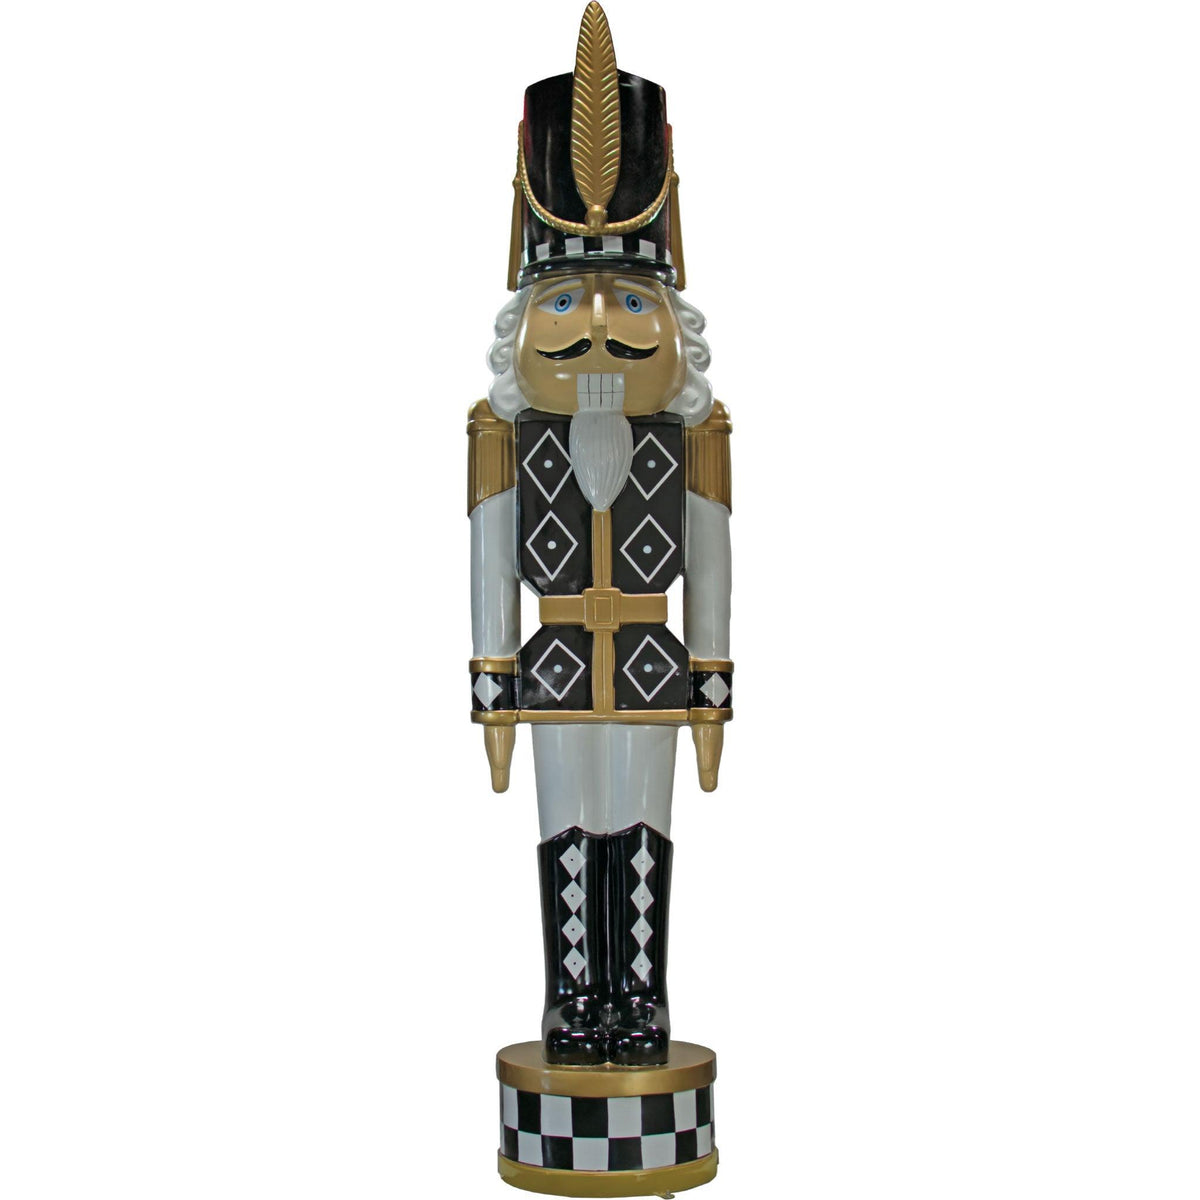 Lee Display's brand new Black and White 12FT Fiberglass Nutcrackers for sale for purchase and rental from leedisplay.com.  Shop now